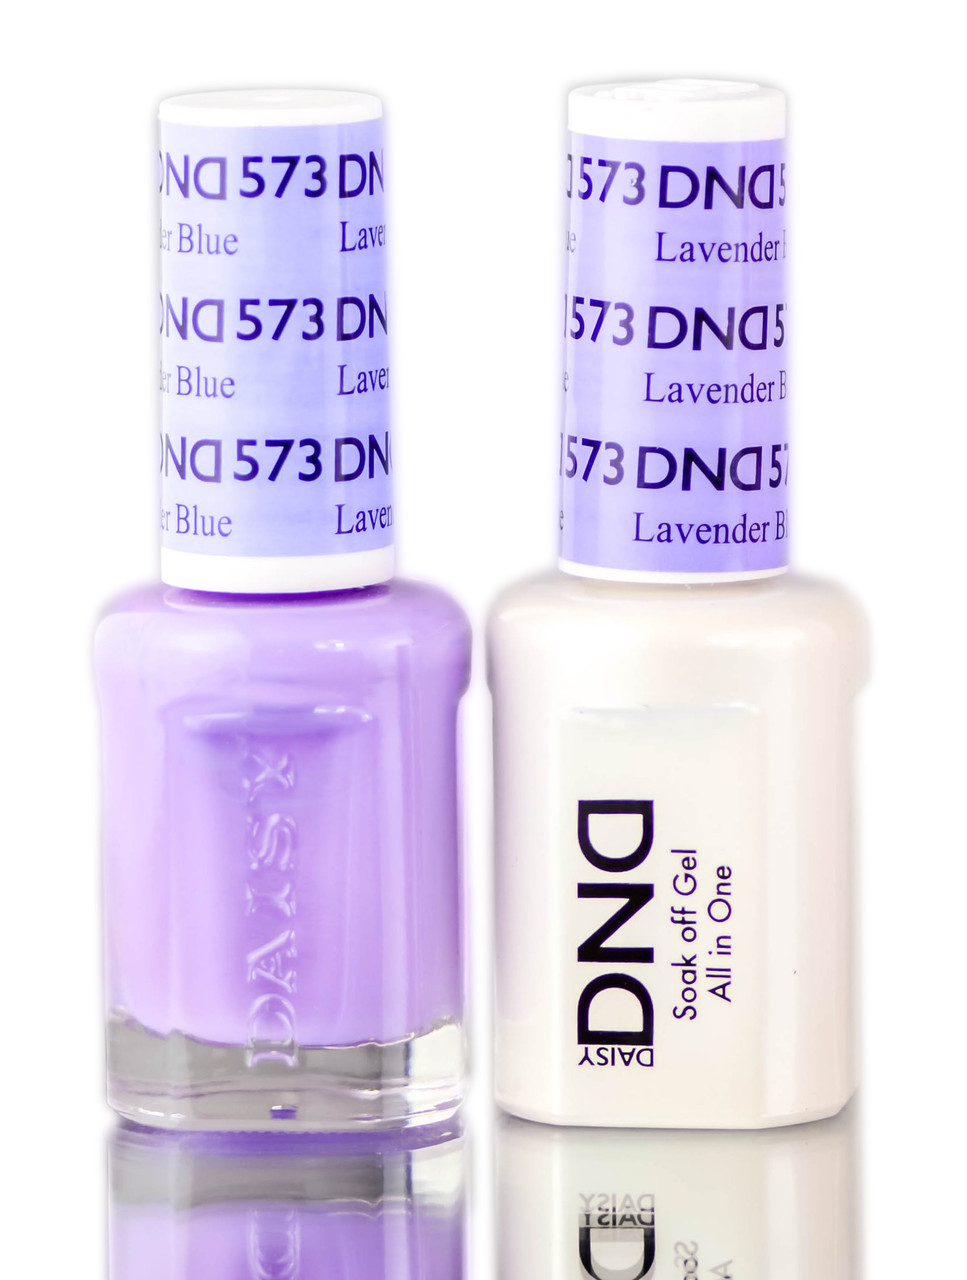 ADJD COMBO NAIL PAINT SUPER STAY GLOSSY FINISH LAVENDER Lavender - Price in  India, Buy ADJD COMBO NAIL PAINT SUPER STAY GLOSSY FINISH LAVENDER Lavender  Online In India, Reviews, Ratings & Features |